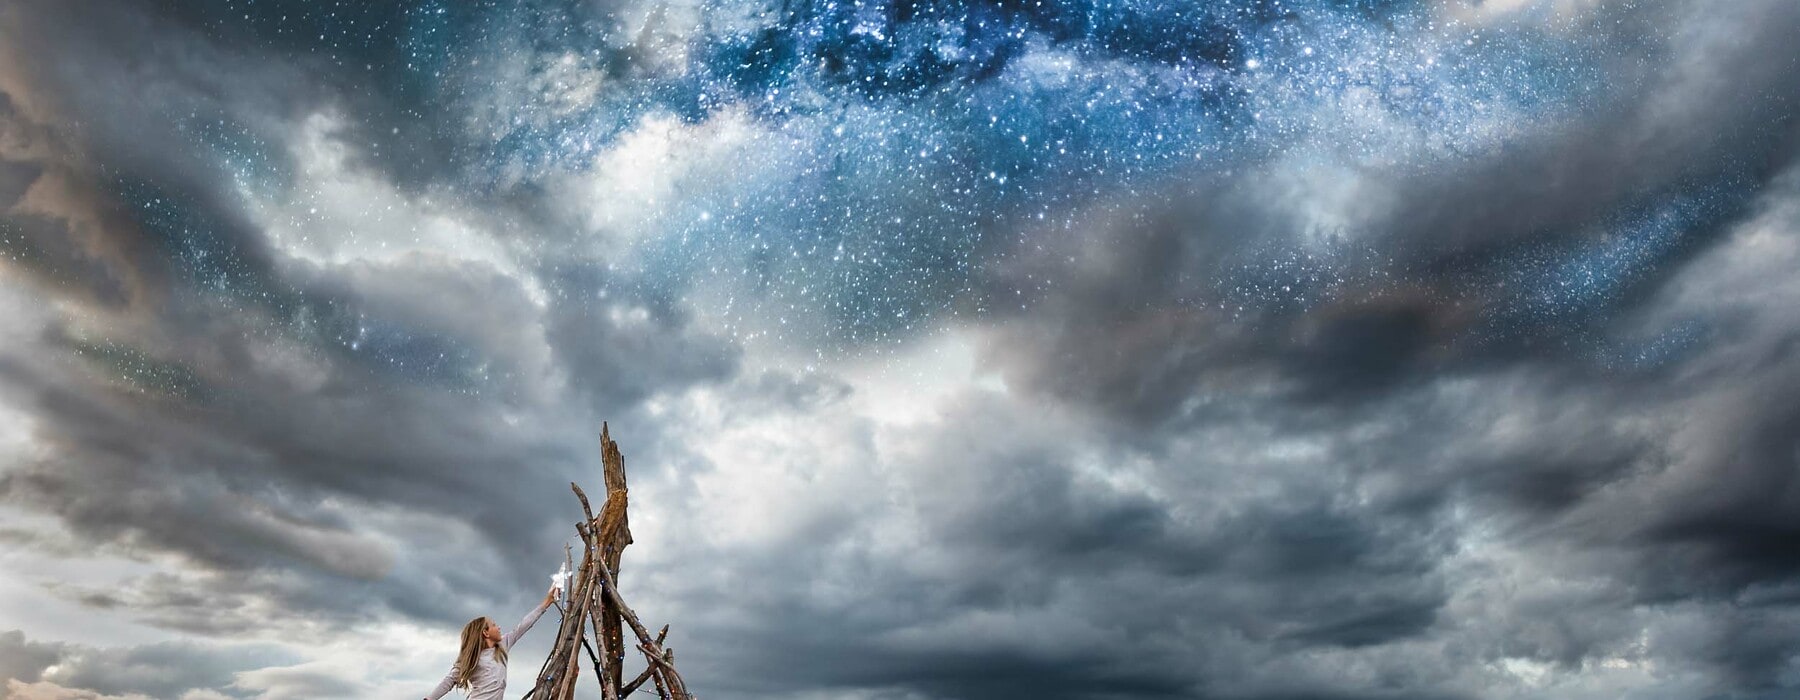 Girl placing star on driftwood tree under a starry night sky